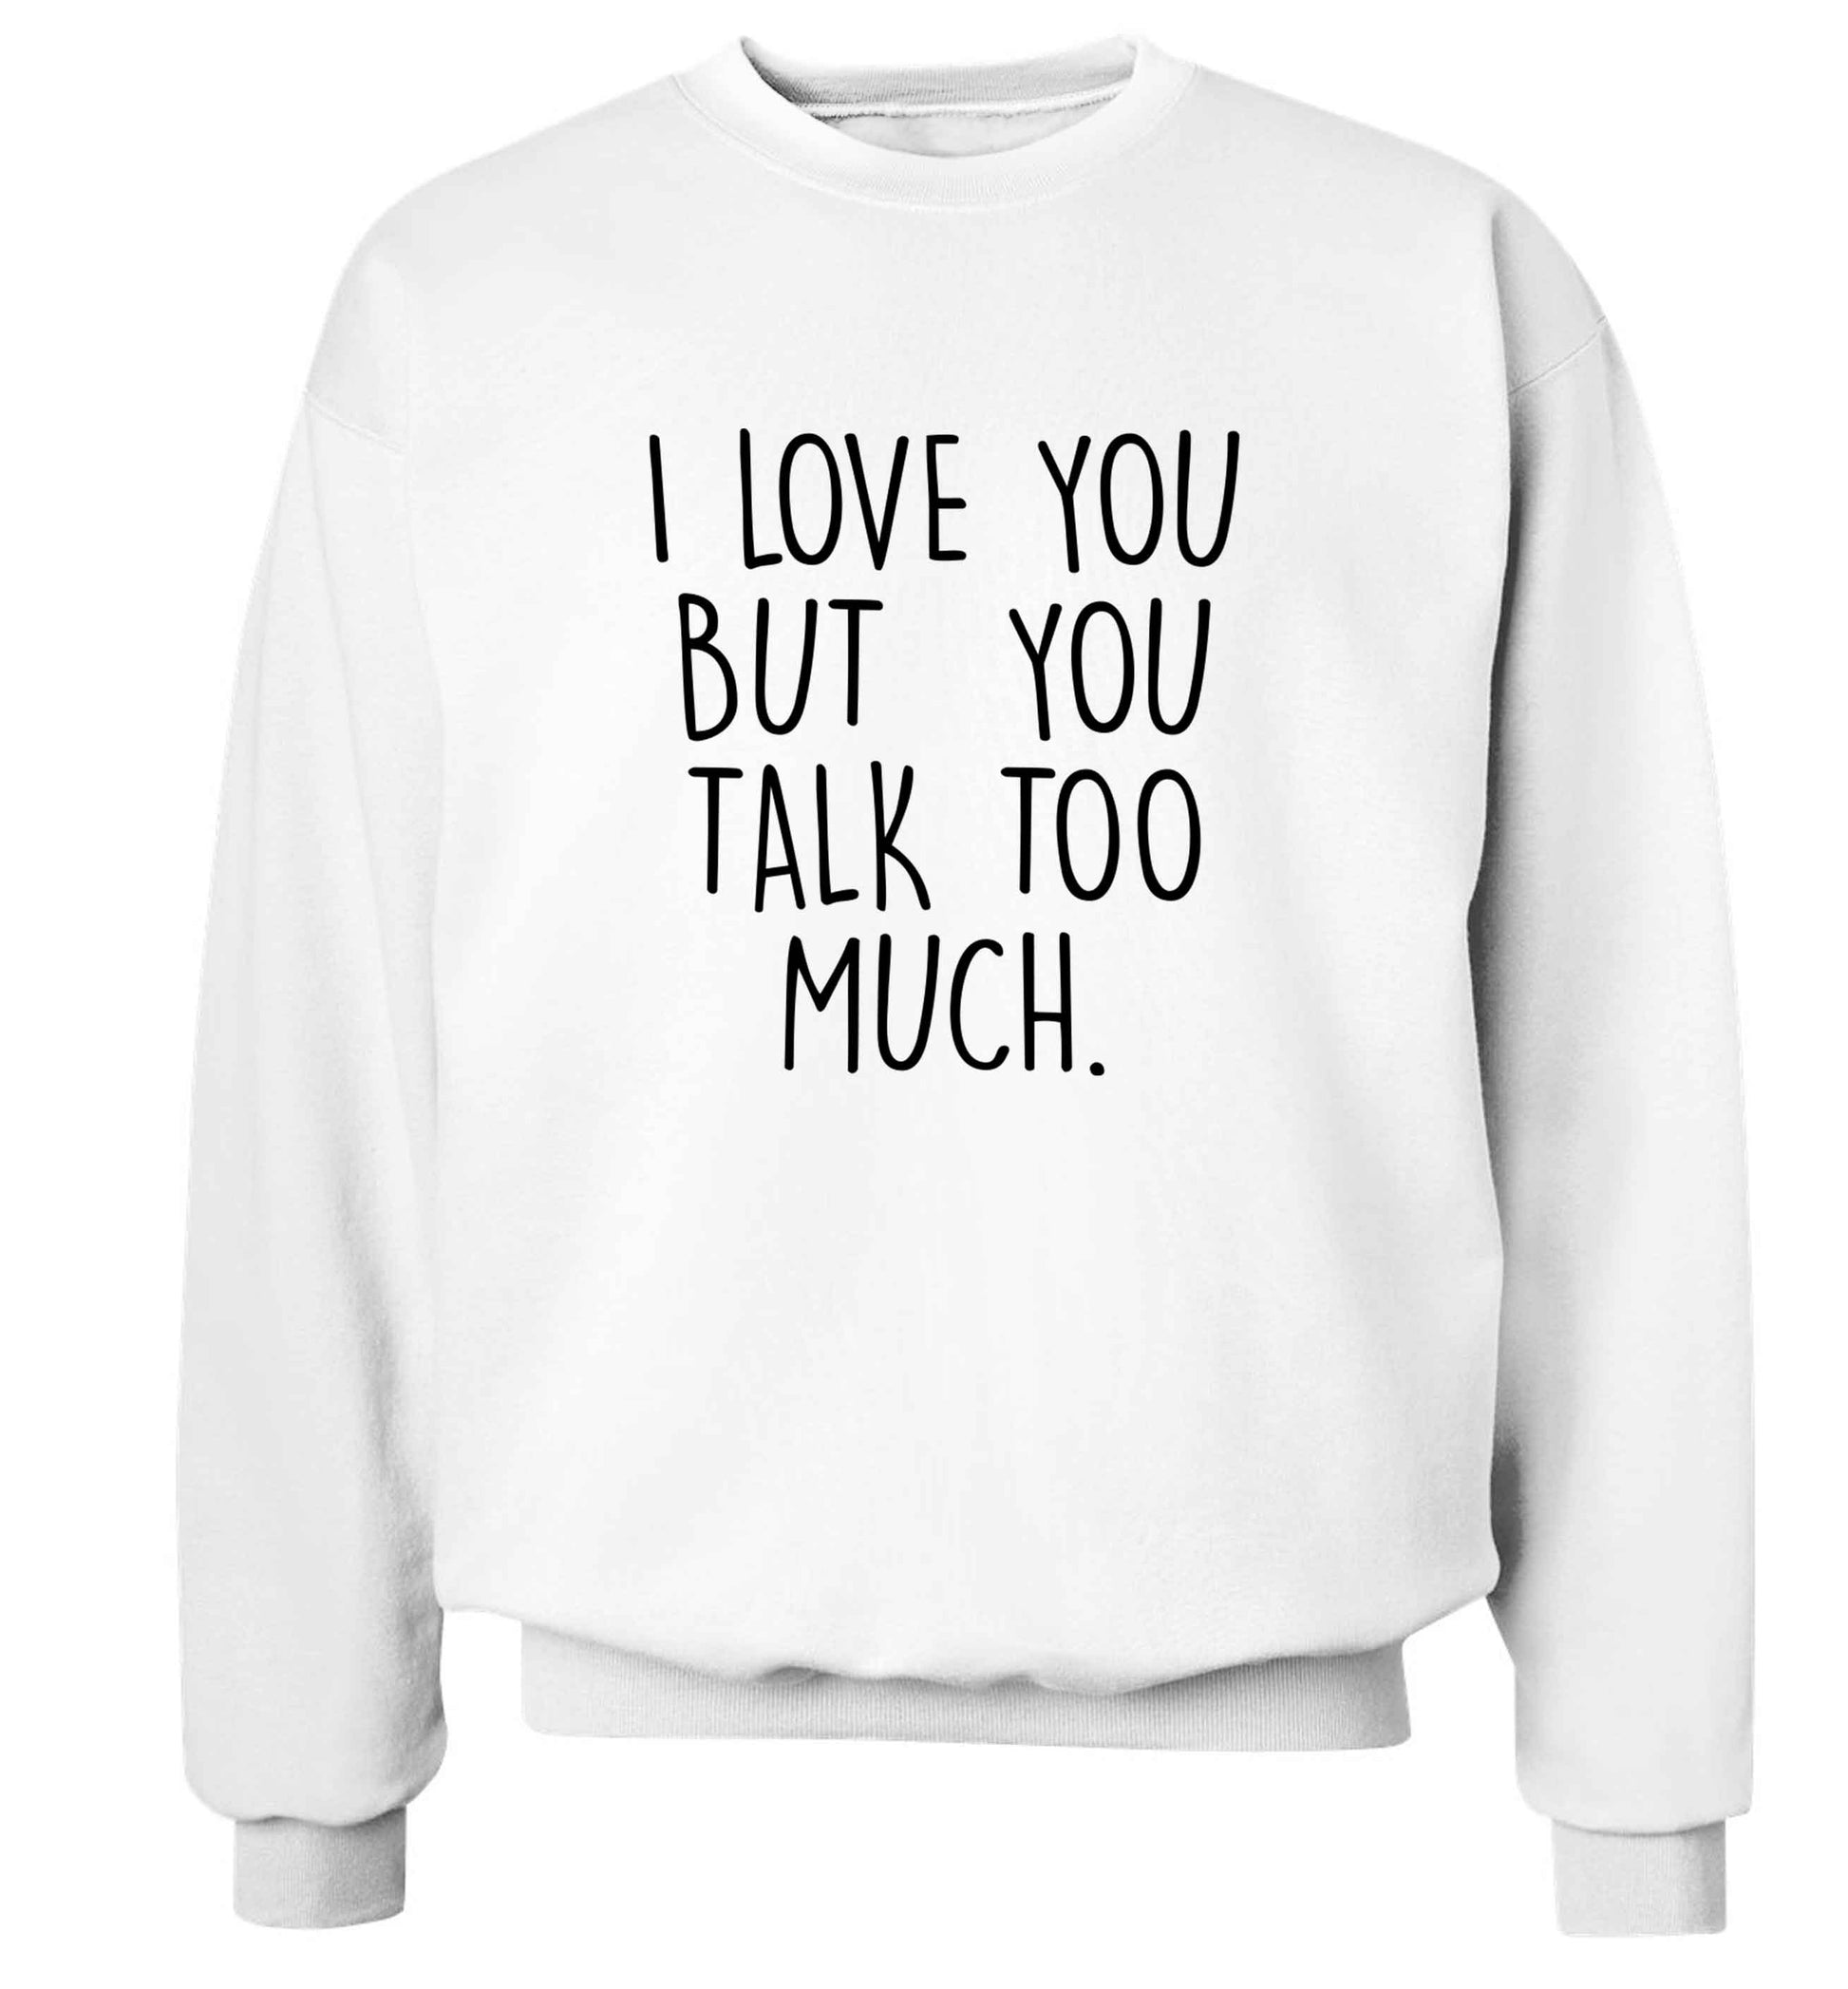 I love you but you talk too much adult's unisex white sweater 2XL